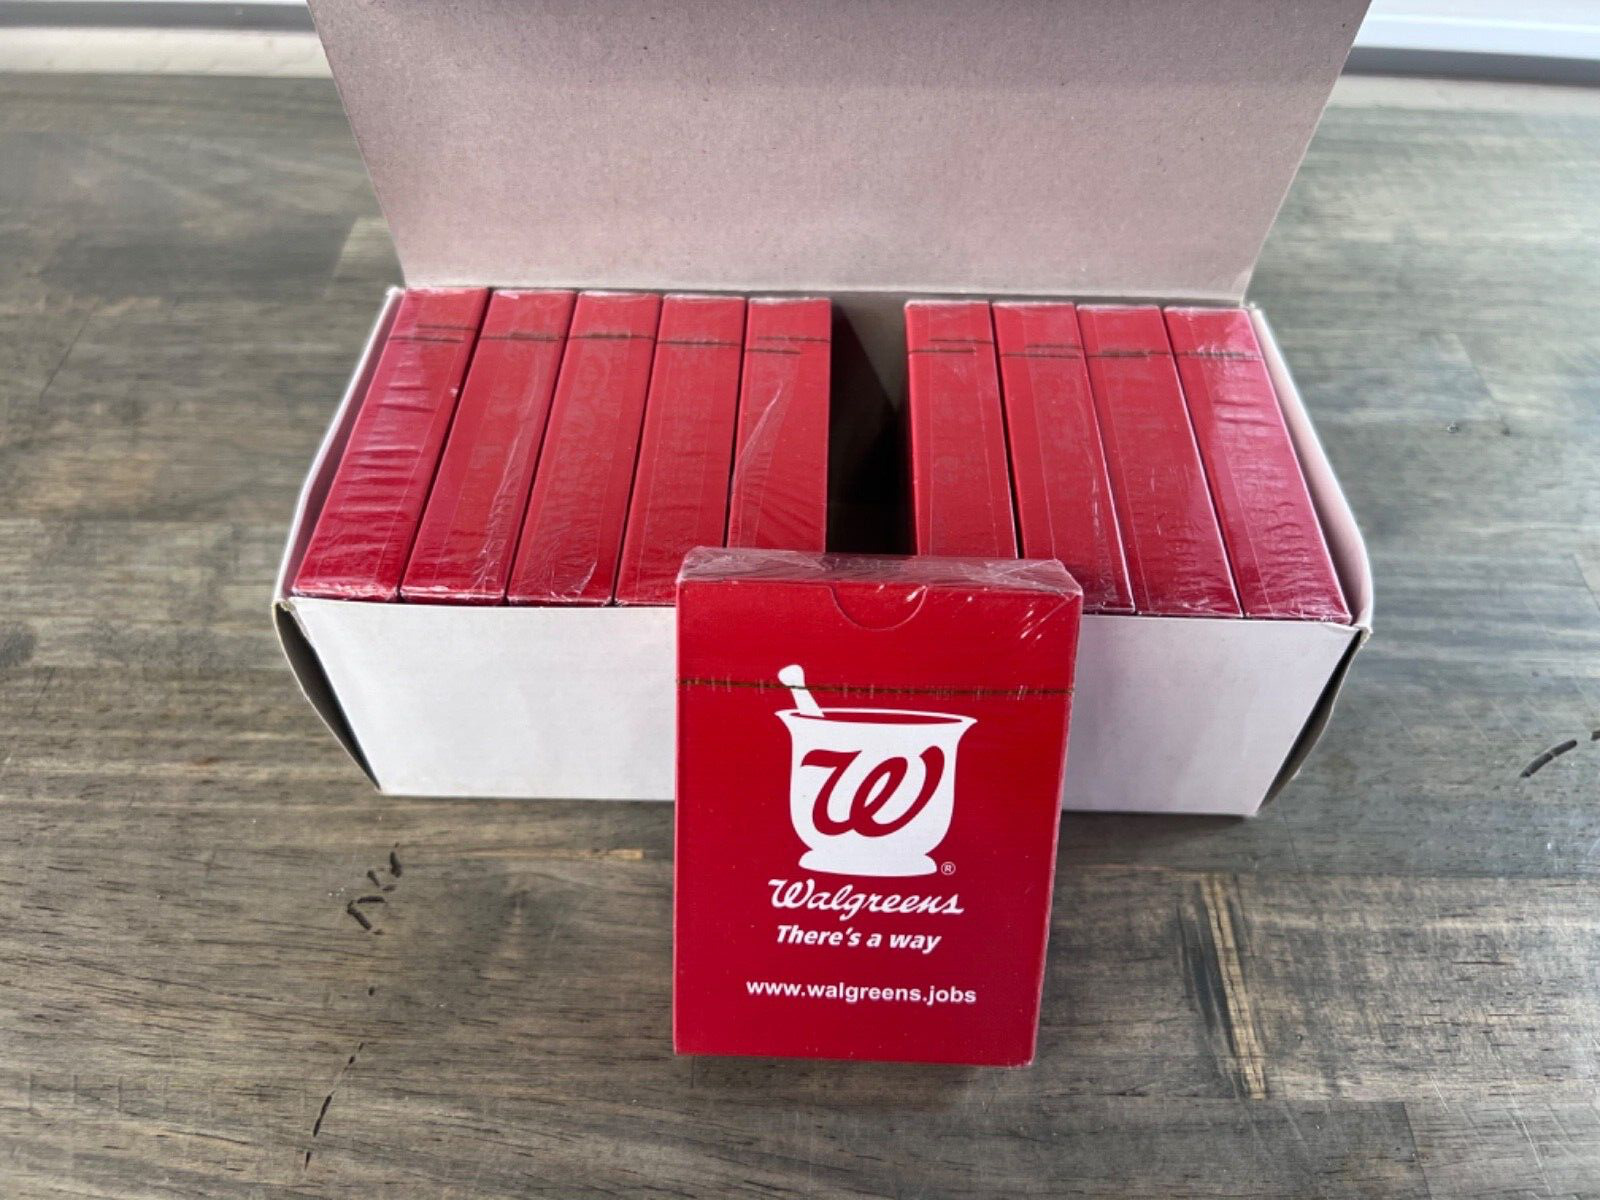 NEW - Lot of 10 Walgreens Sealed Playing Cards New In Sealed Package